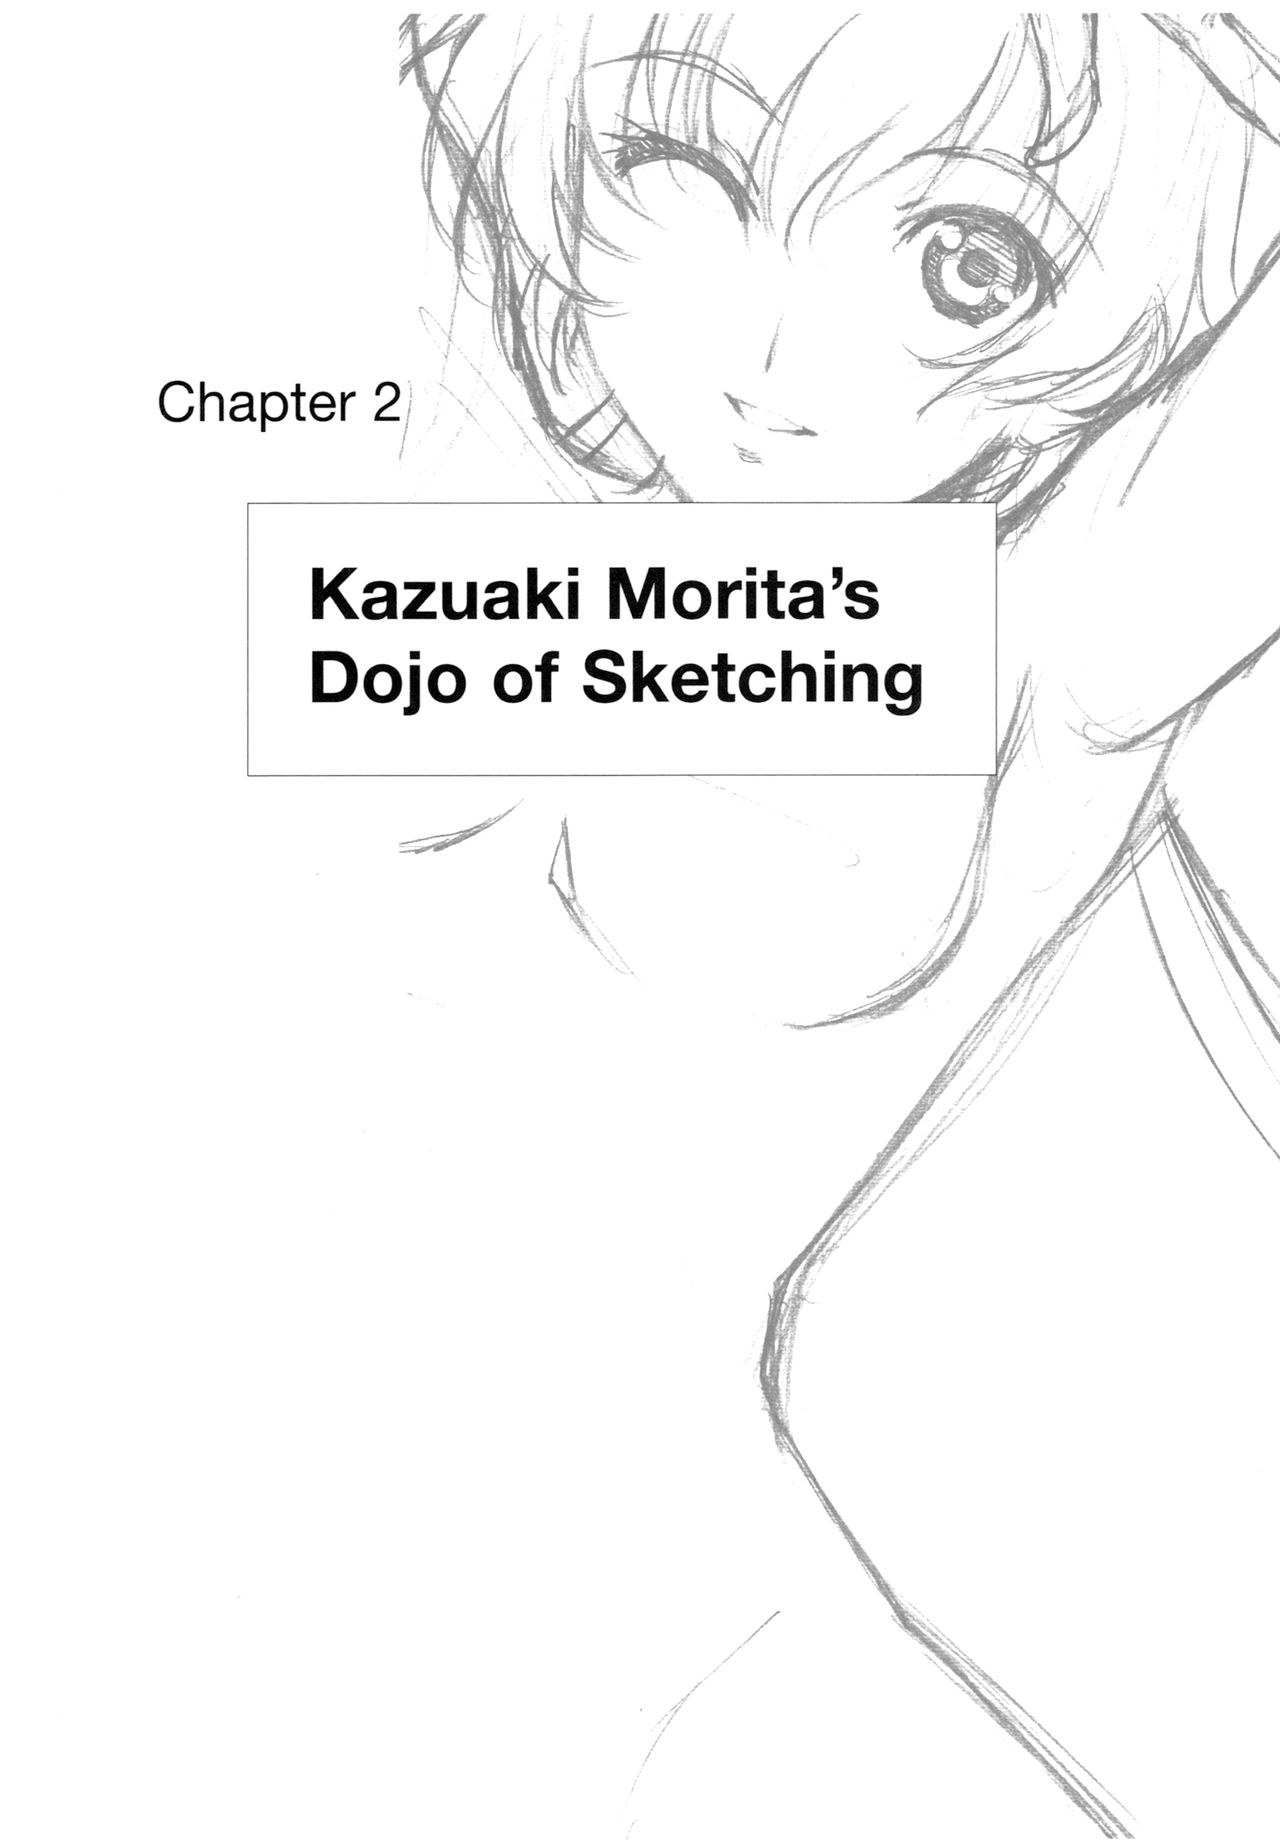 Sketching Manga-Style Vol. 3 - Unforgettable Characters 28